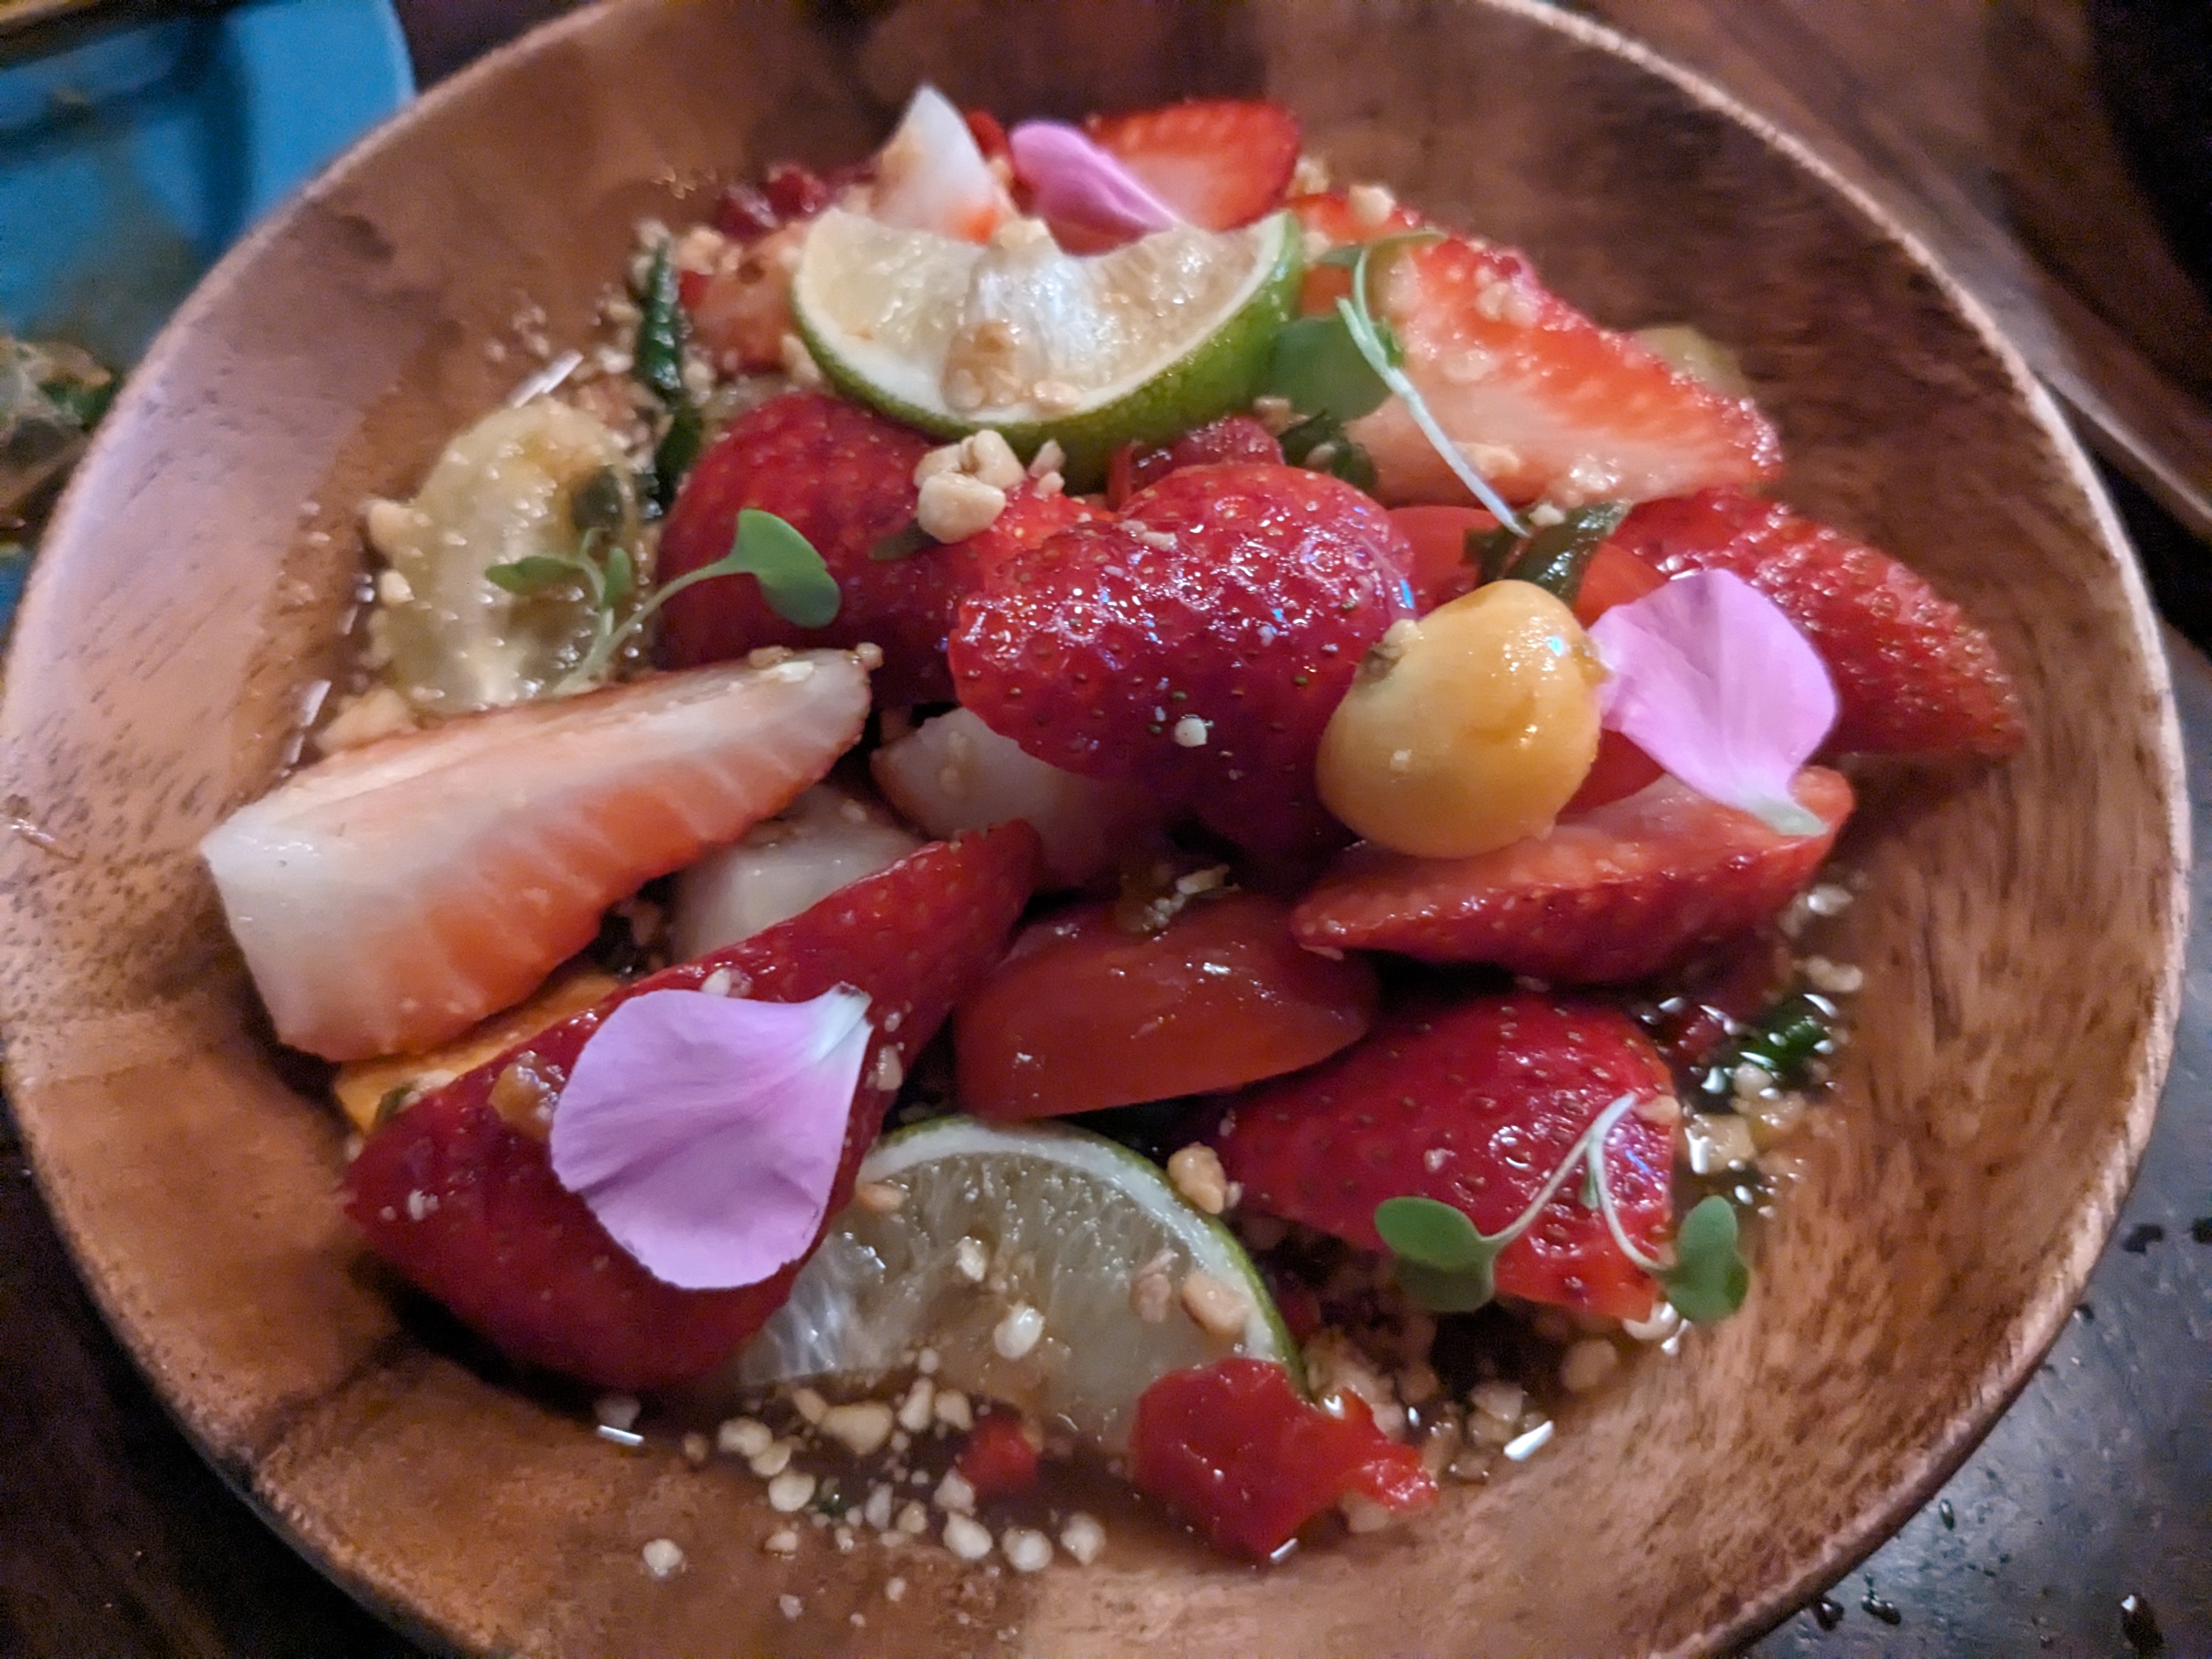 A wooden bowl with strawberries, husk cherries, and aromatics in a soupy dressing.